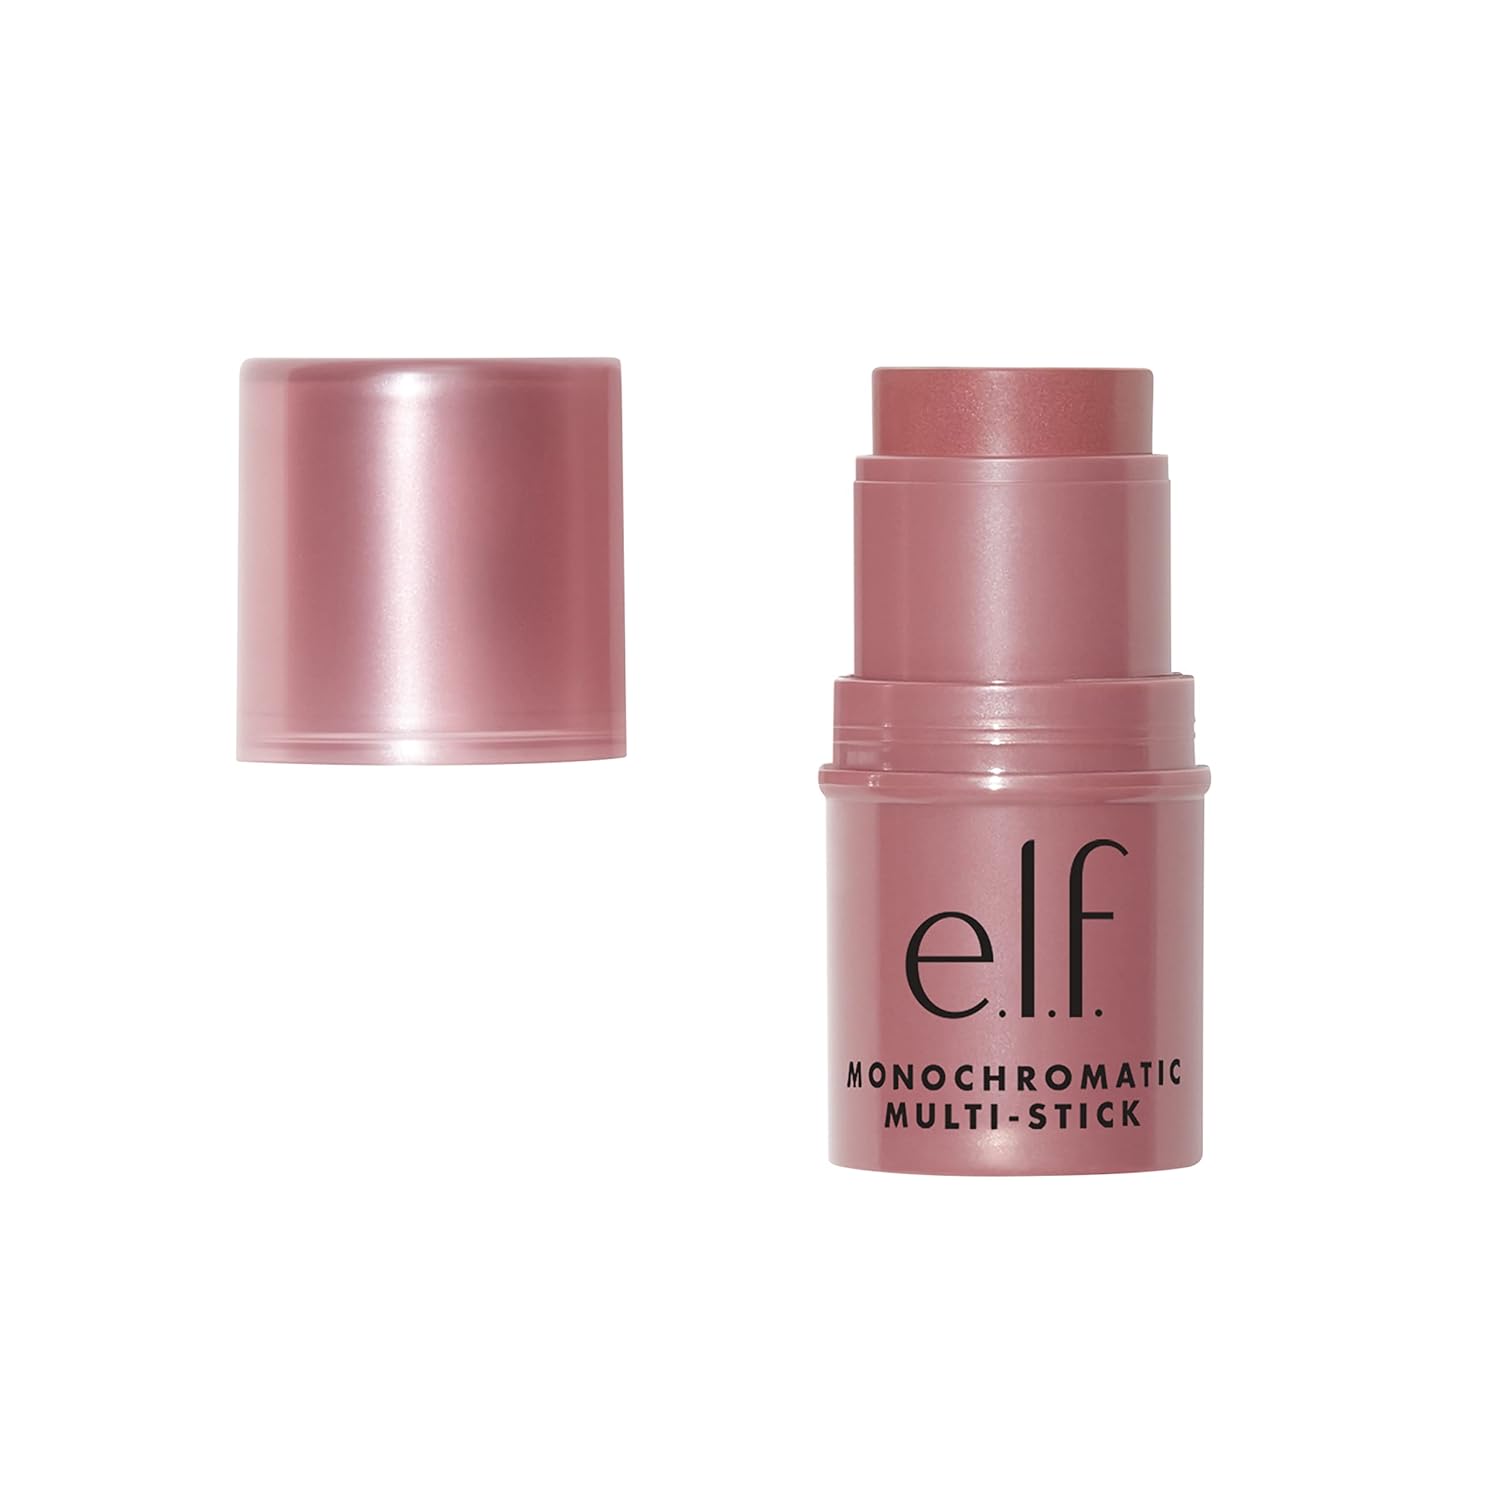 e.l.f., Monochromatic Multi Stick, Creamy, Lightweight, Versatile, Luxurious, Adds Shimmer, Easy To Use On The Go, Blends Effortlessly, Sparkling Rose, 0.155 Oz